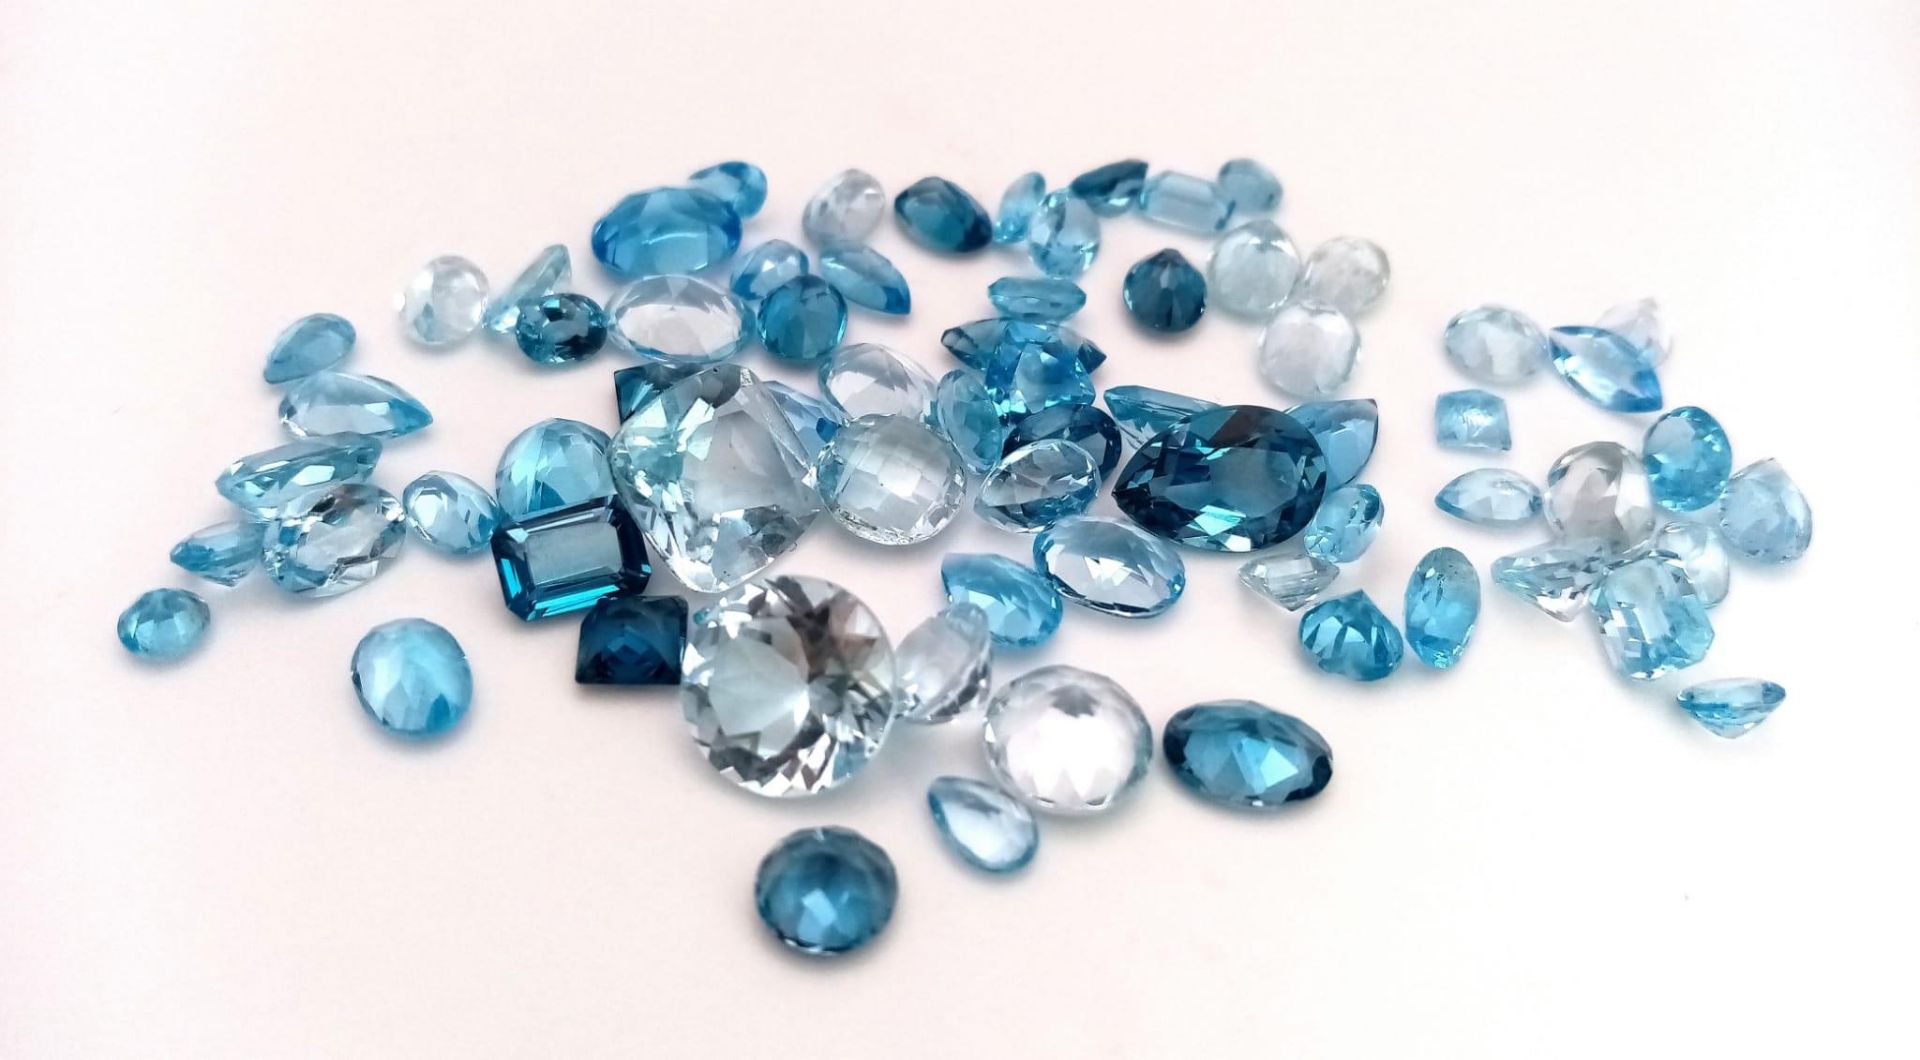 A 78.25ct Blue Topaz Gemstone Lot Mixed Shapes Eye Clean